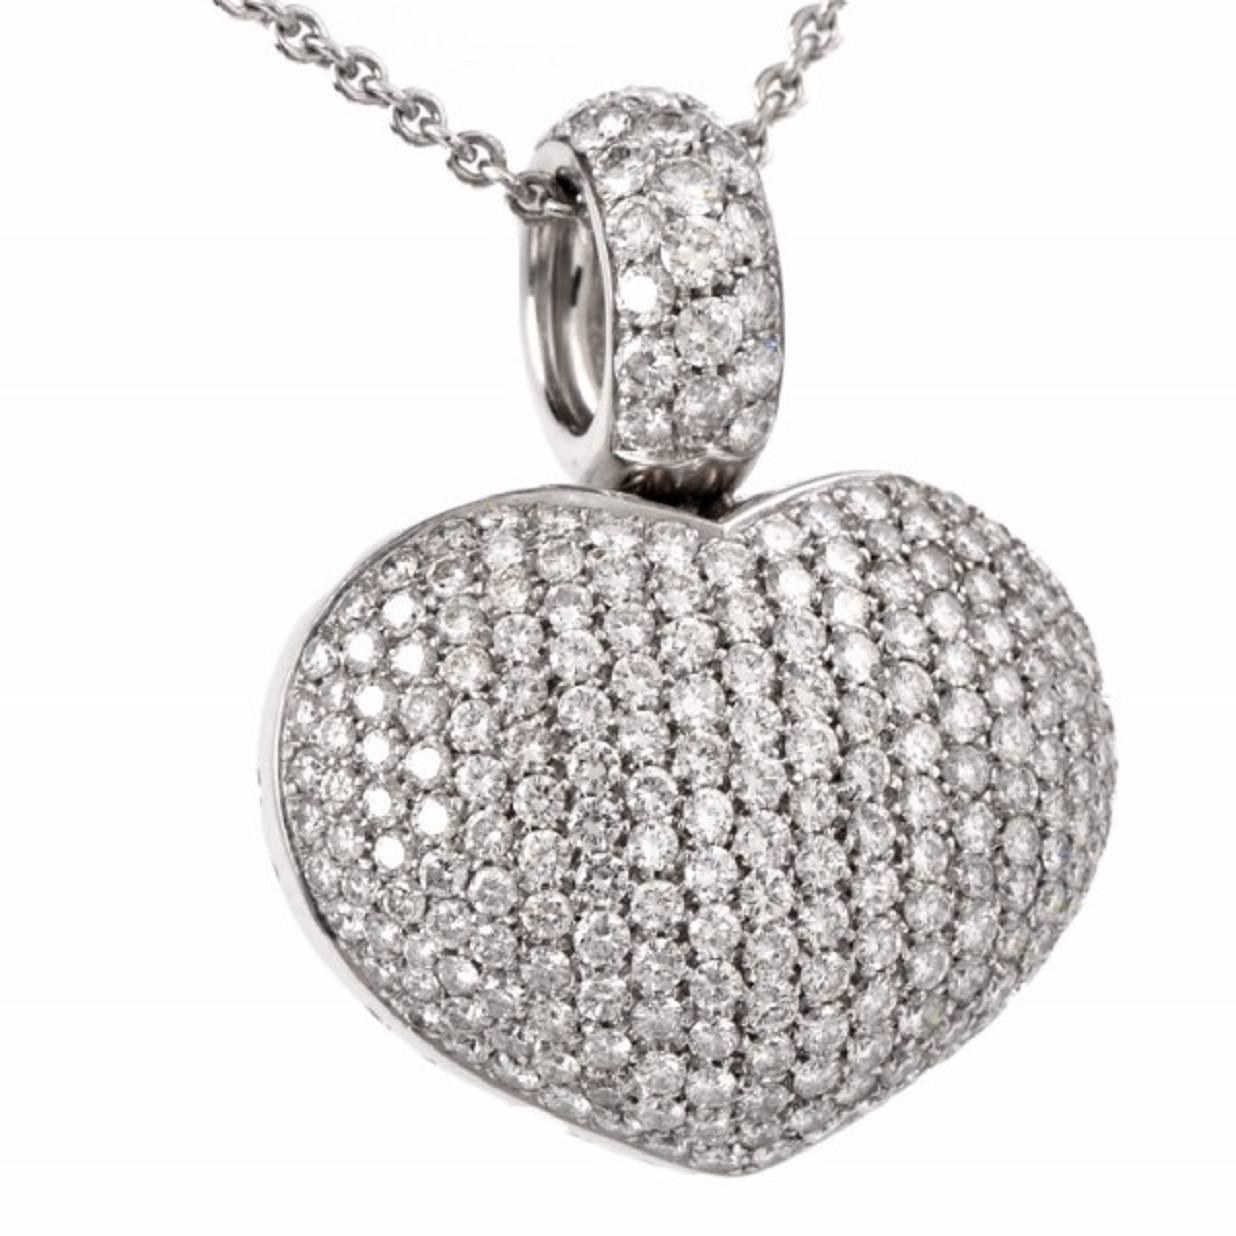 Dover Jewelry presents this breathtaking Italian designer Pasquale Bruni pendant necklace, crafted in solid 18K white gold and embellished completely with some 246 genuine round cut diamonds approximately: 11.64 cttw, G-H color, VS1-VS2 clarity,